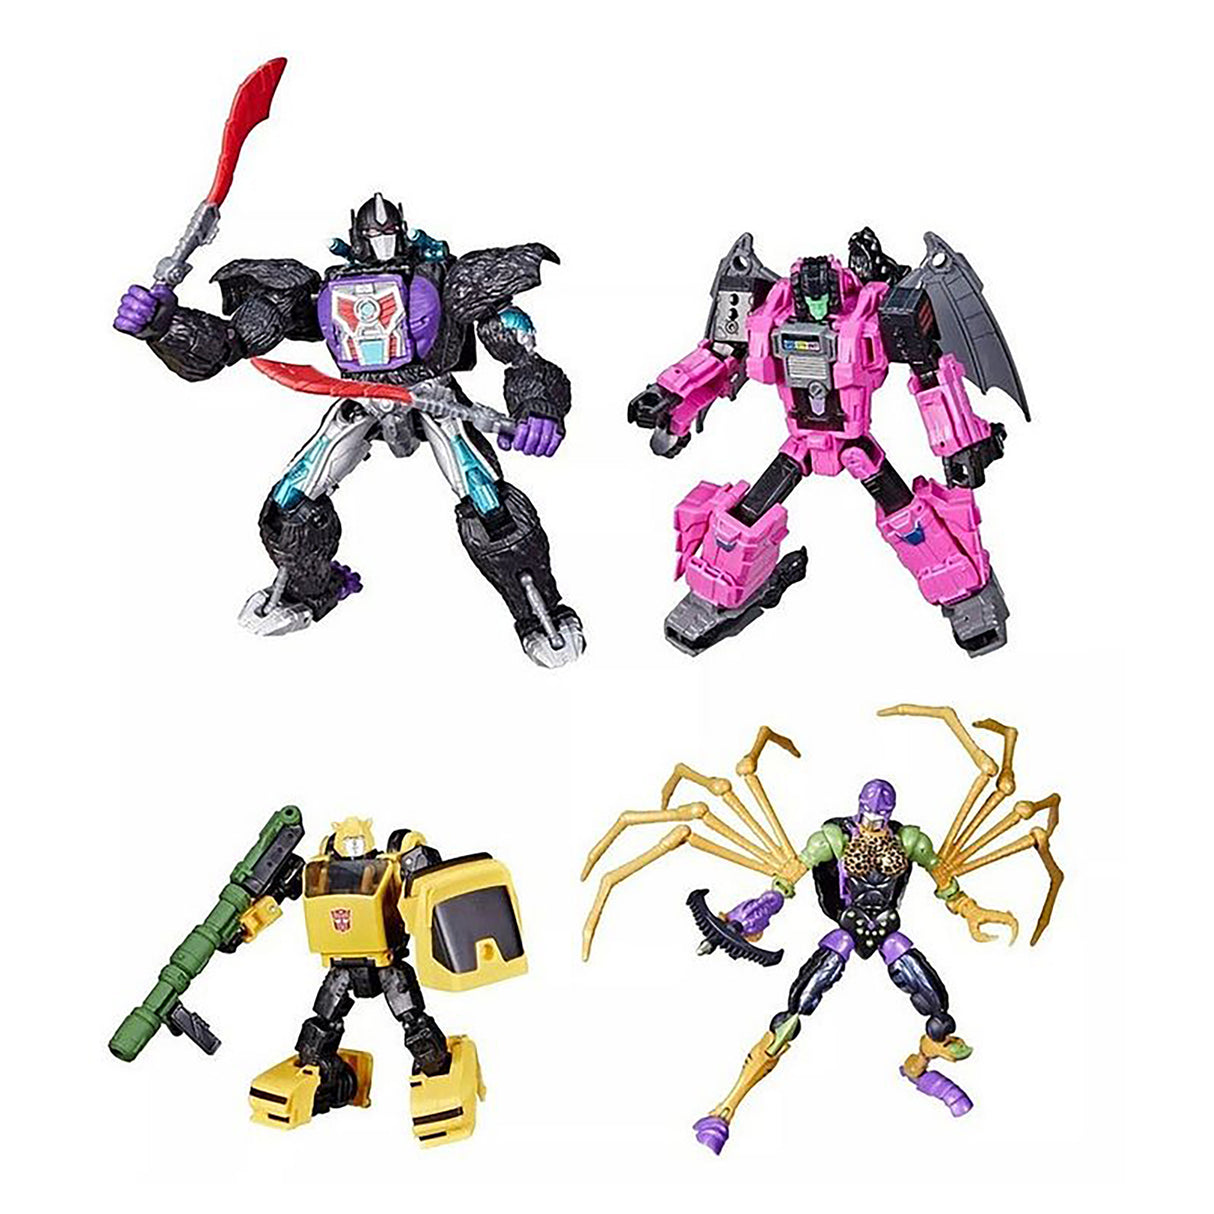 Transformers Bumblebee Bumblebee Worlds Collide Action Figure Multipack - F0994 (7.5 inches)